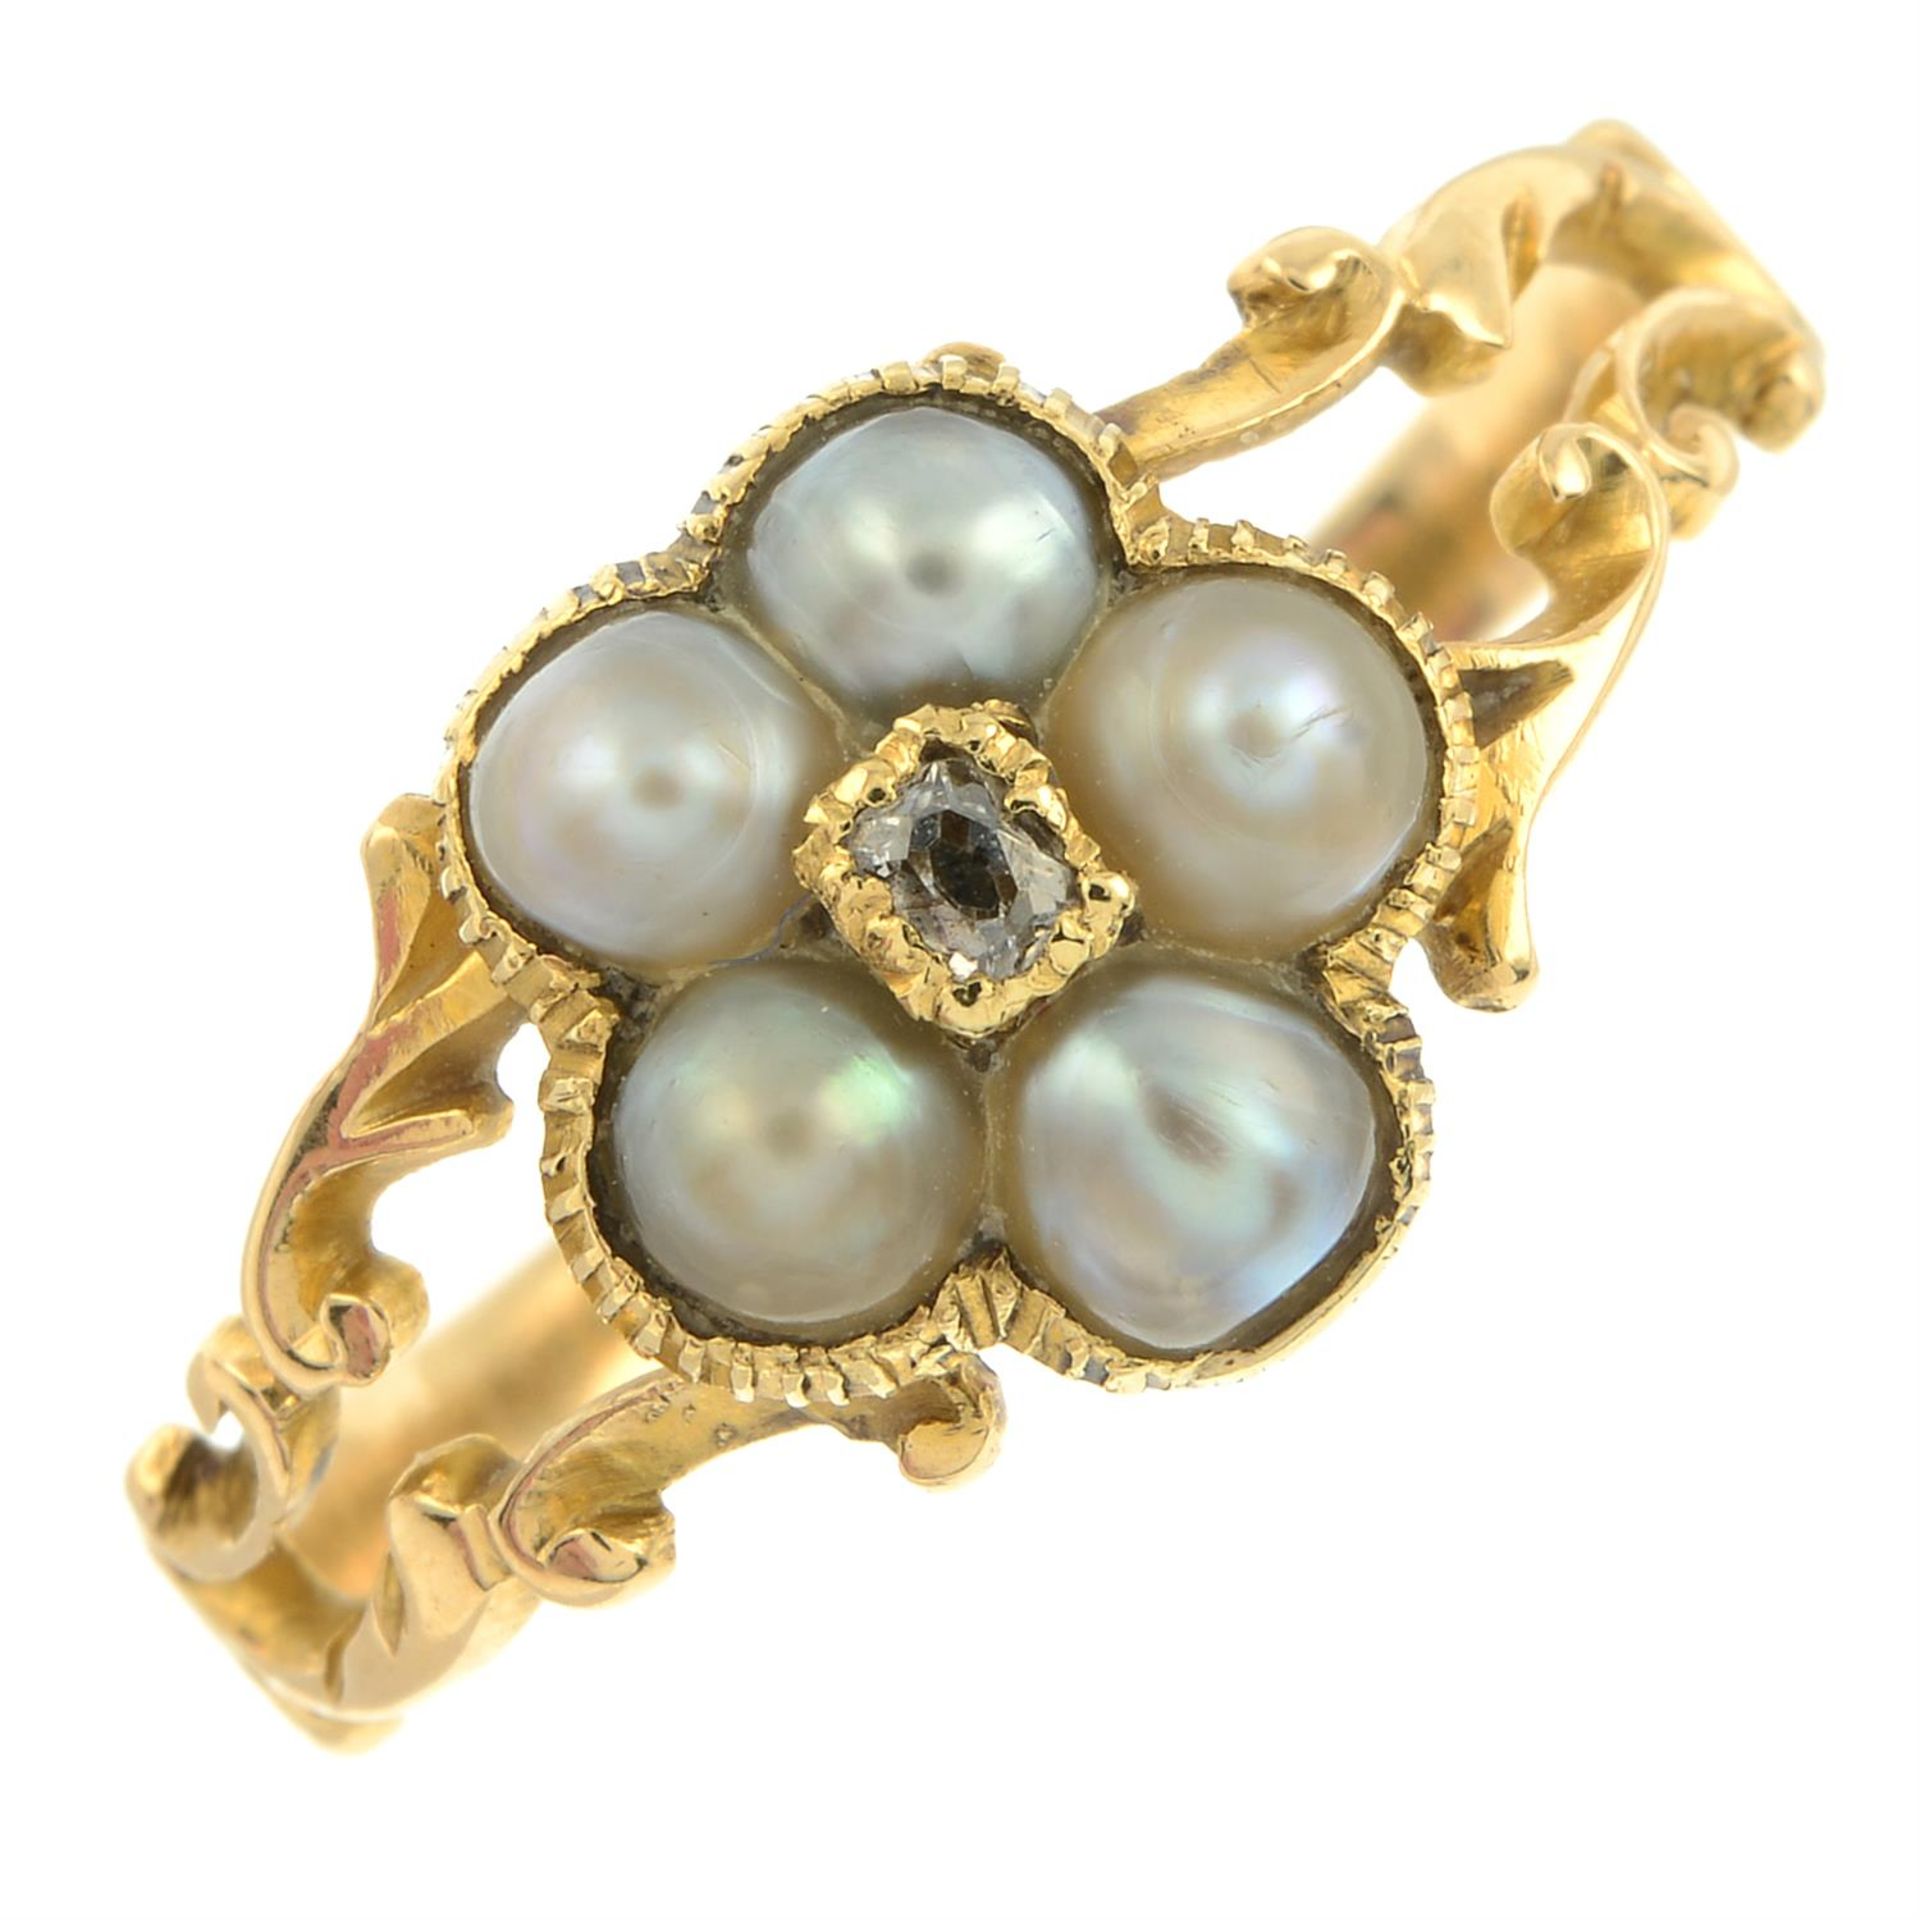 A mid 19th century 18ct gold old-cut diamond and split pearl floral cluster ring, - Image 2 of 5